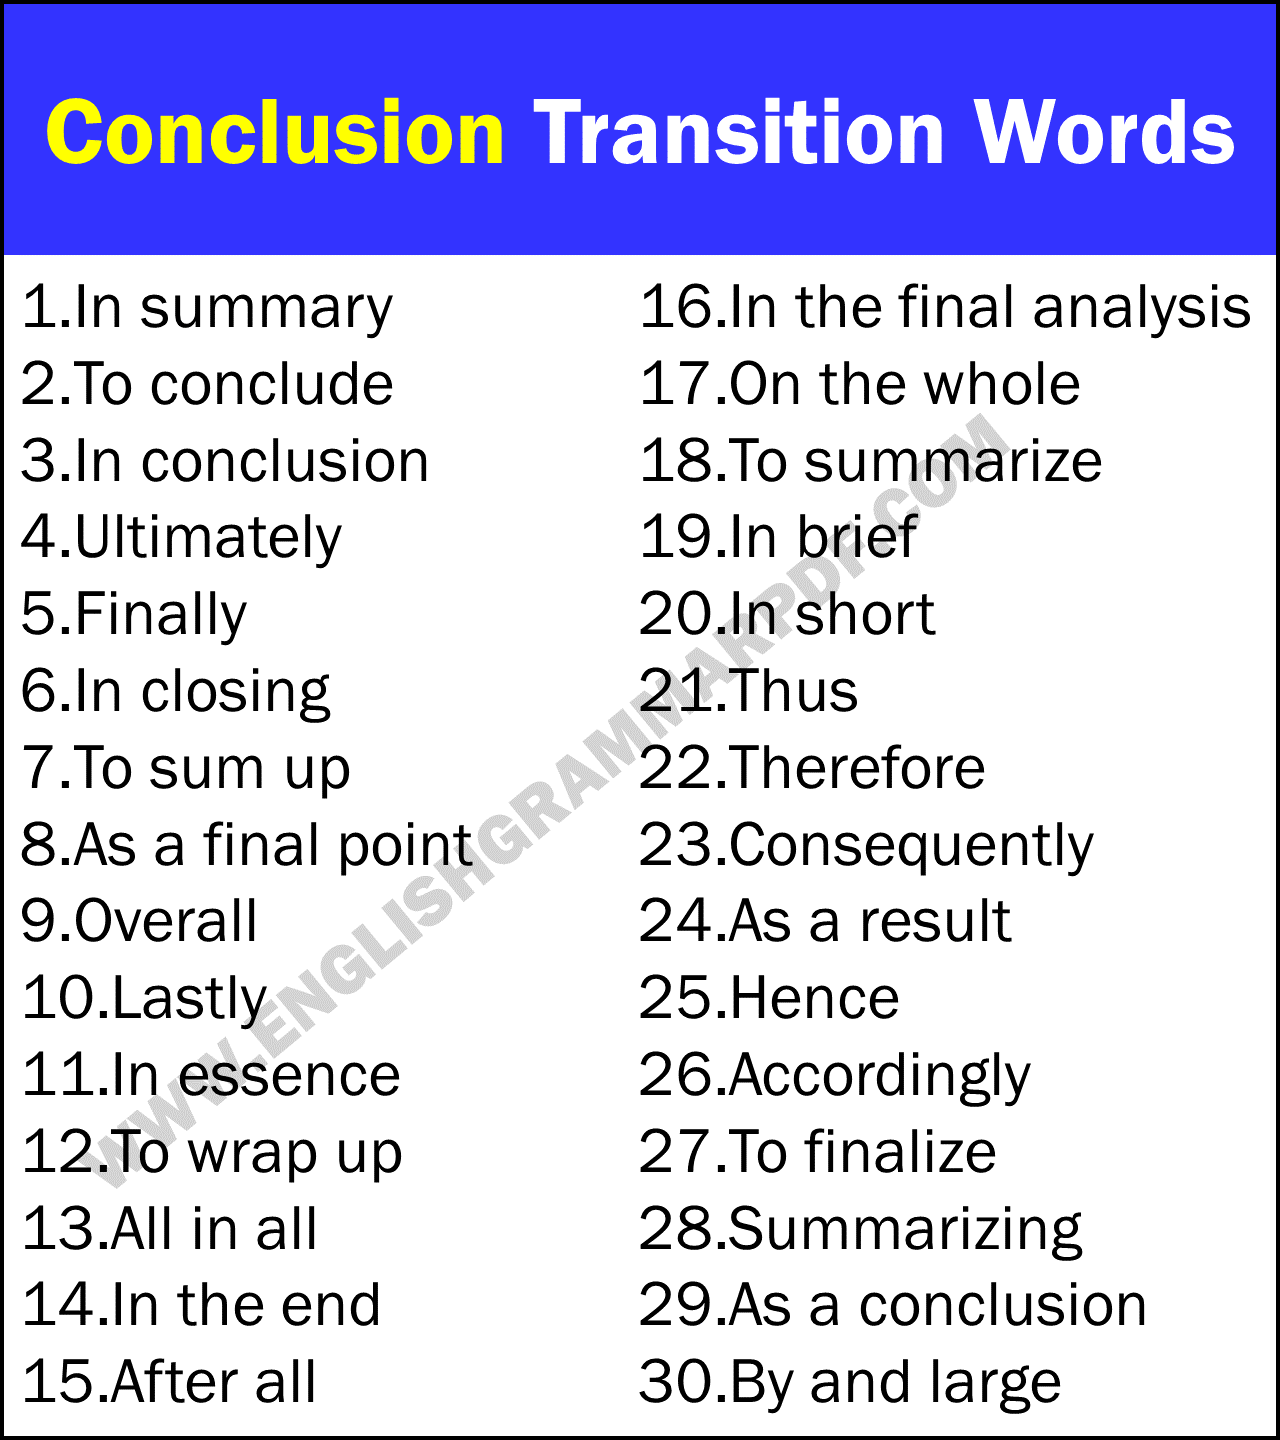 Conclusion Transition Words